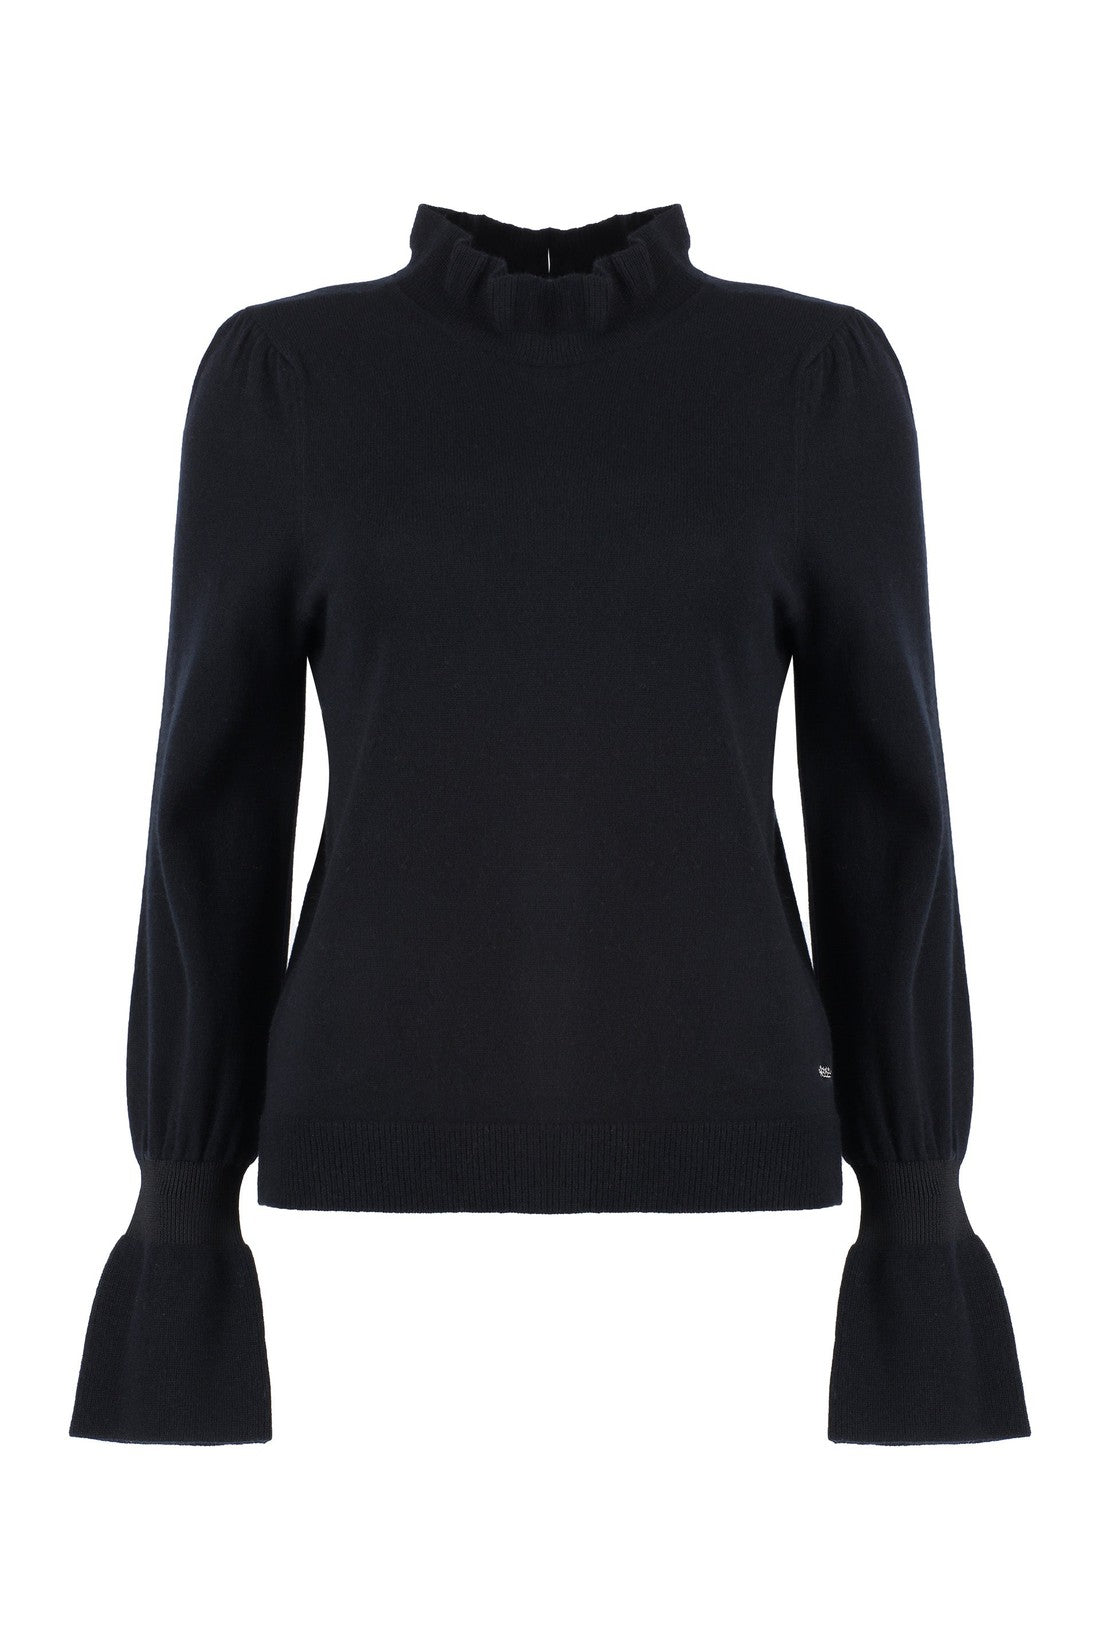 BOSS-OUTLET-SALE-Ribbed cashmere and wool sweater-ARCHIVIST